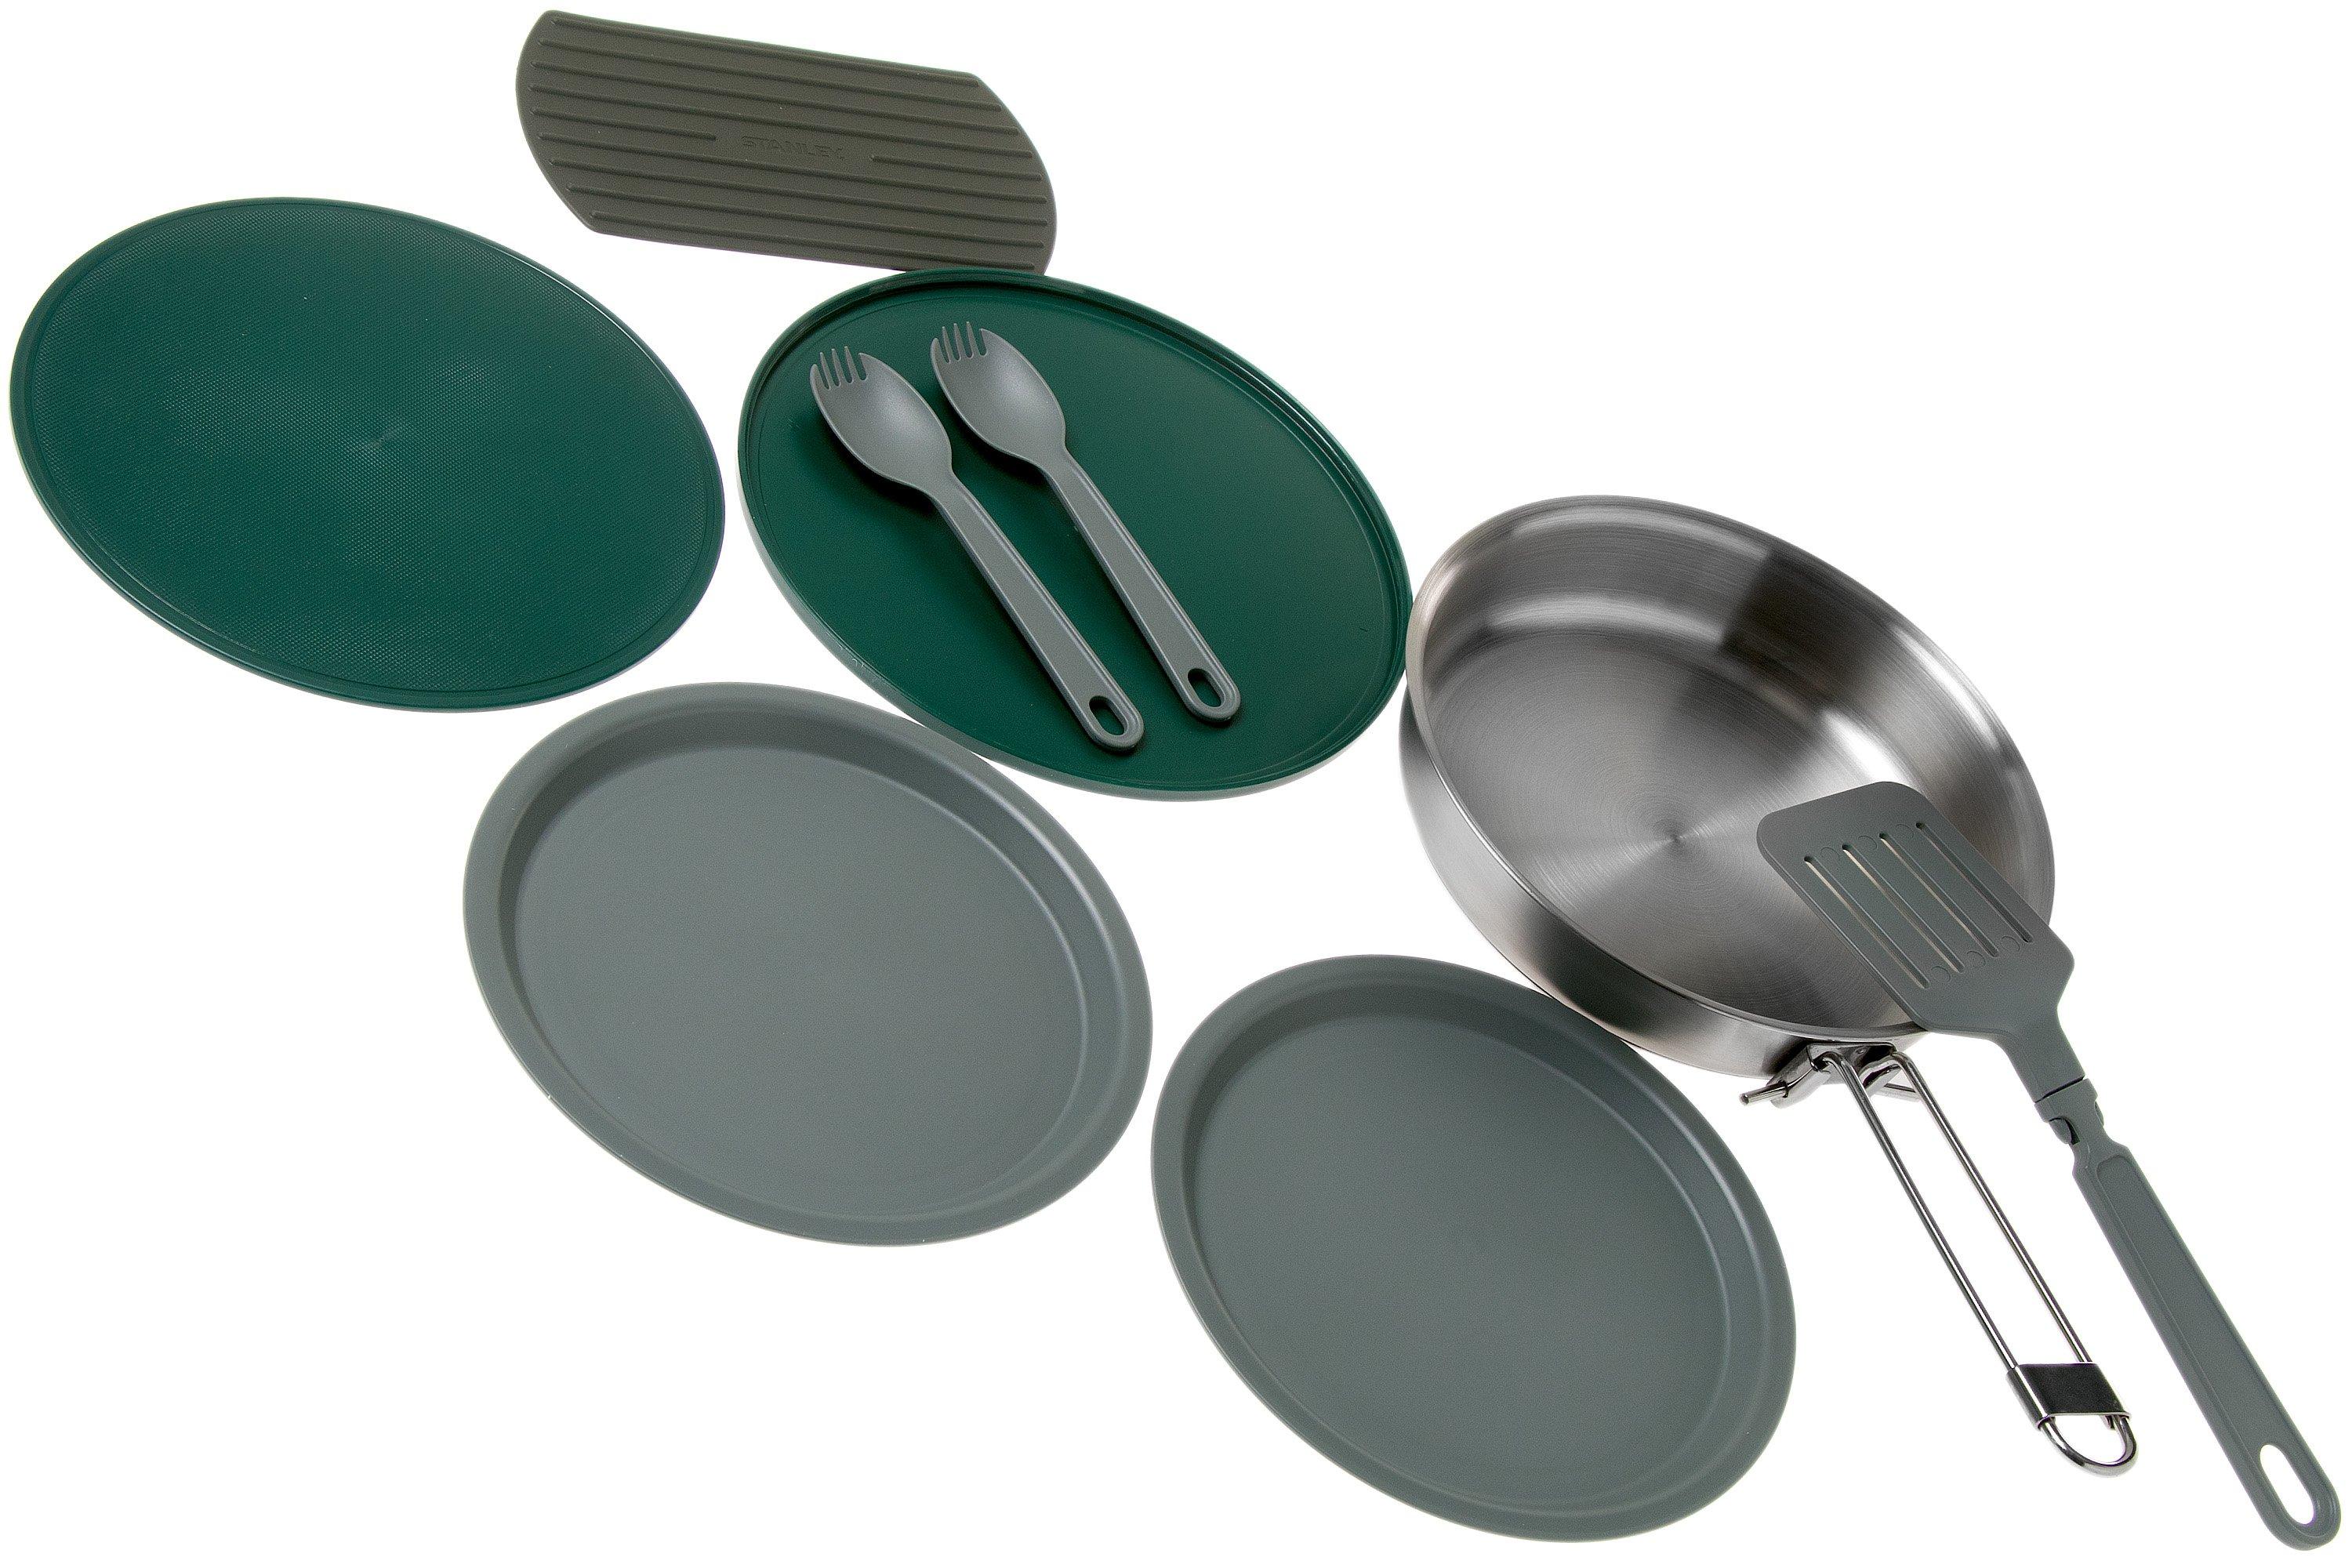 Stanley PMI The All-In-One frying pan Set  Advantageously shopping at